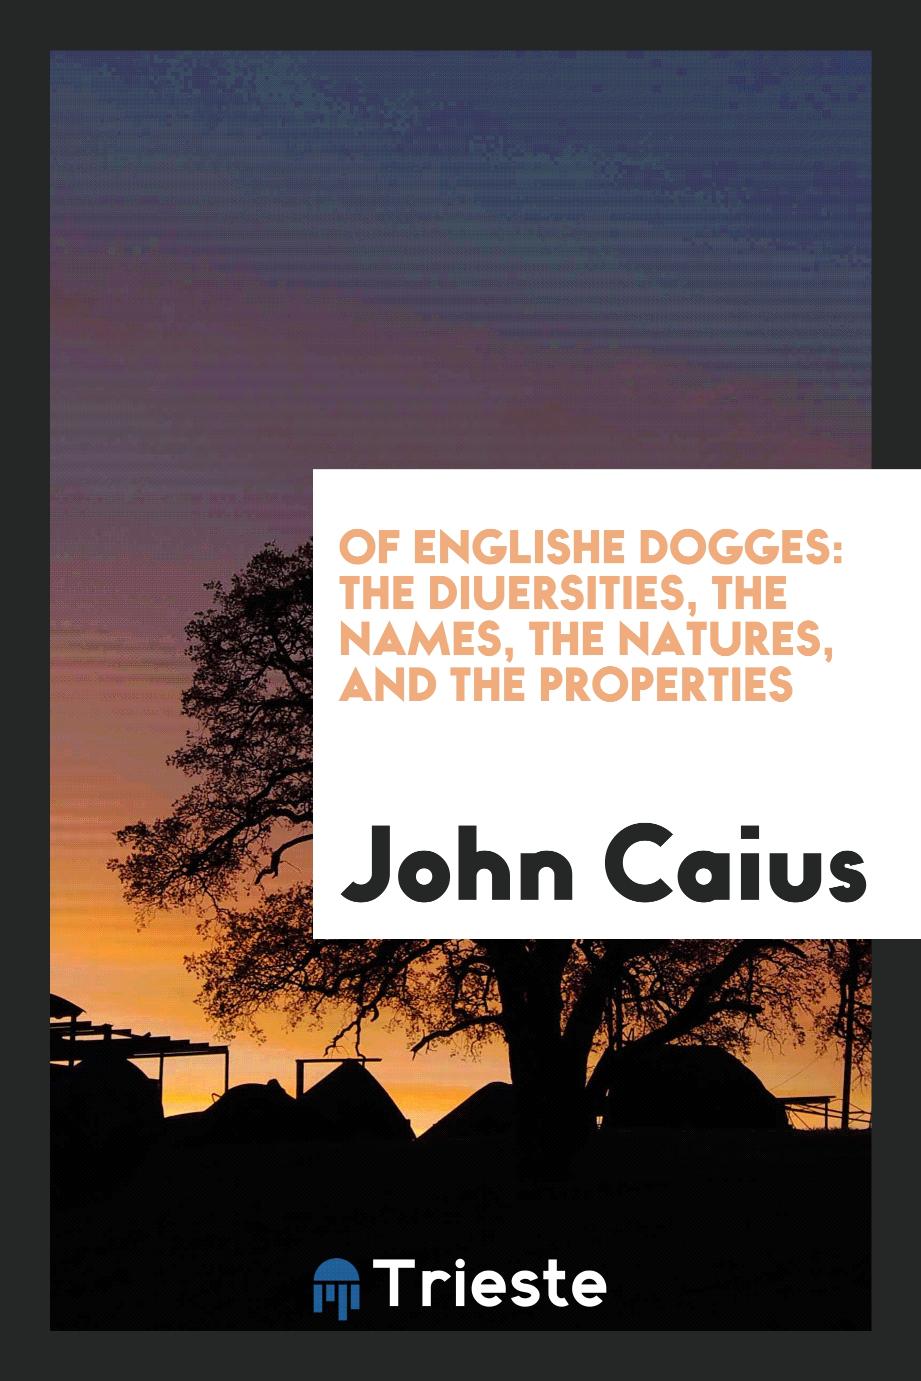 Of Englishe dogges: the diuersities, the names, the natures, and the properties